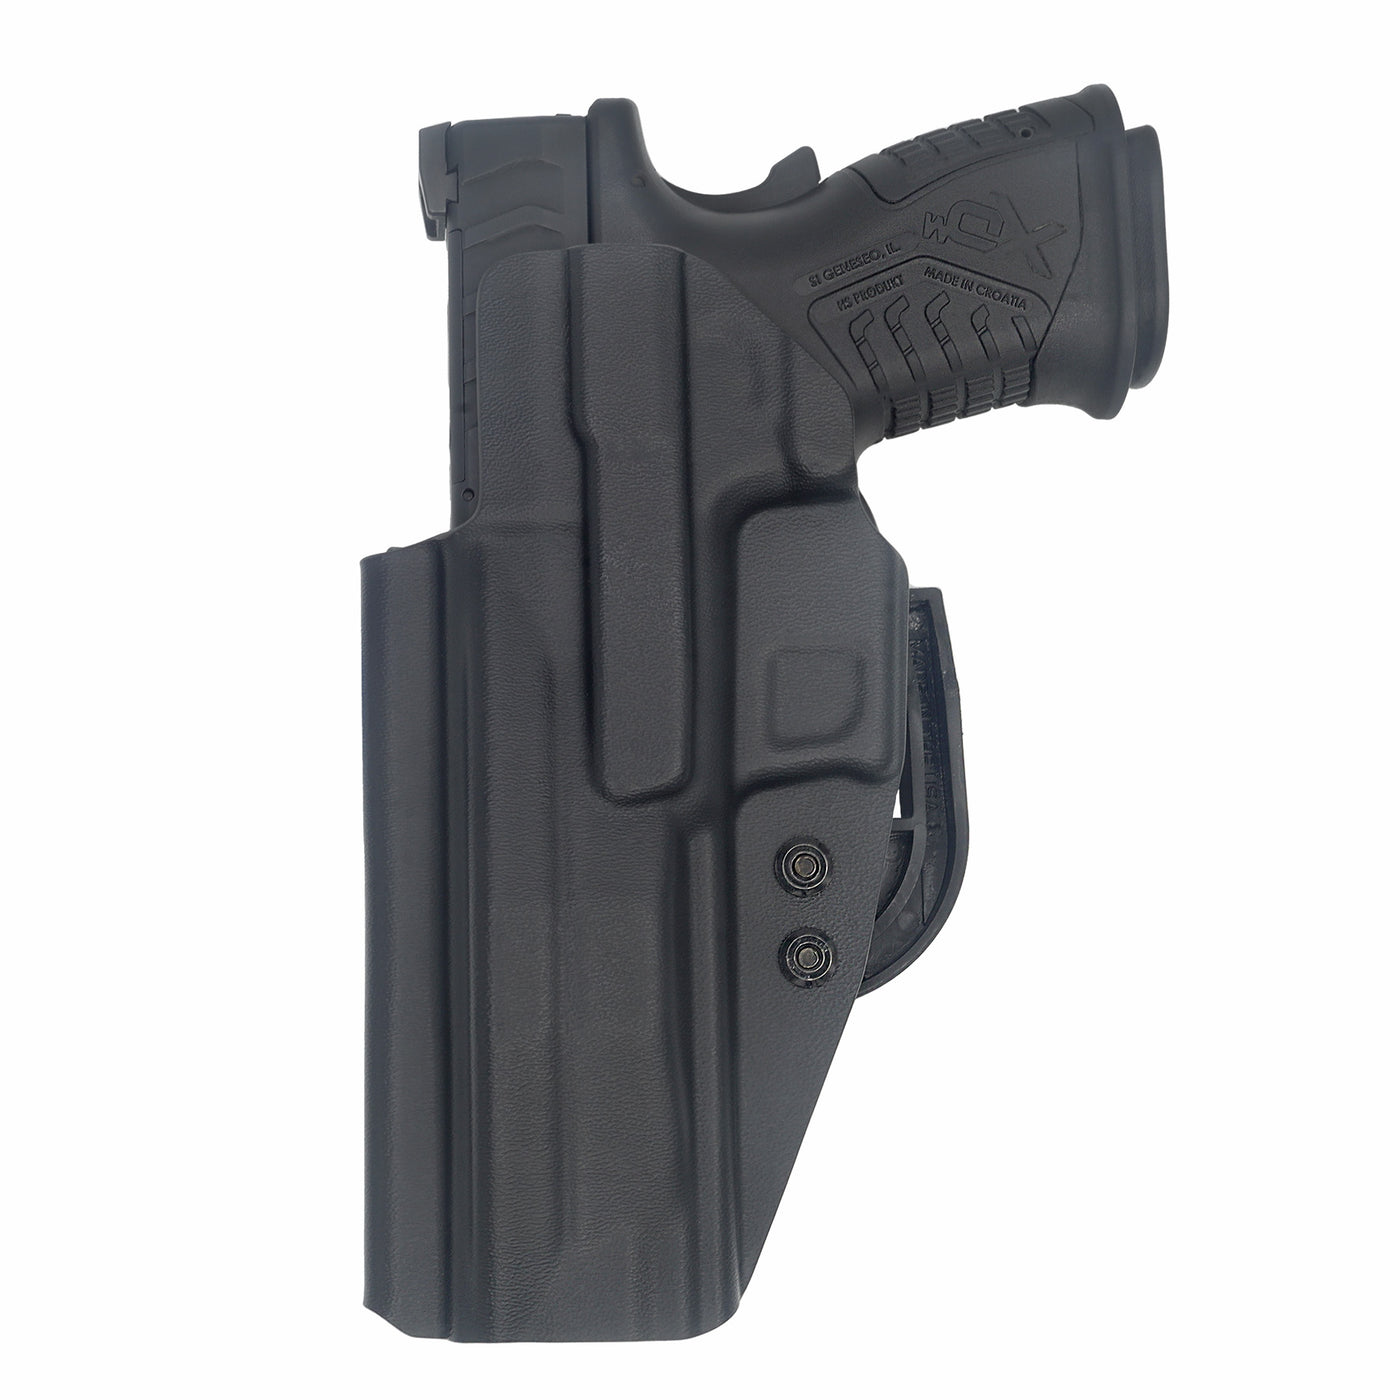 C&G Holsters Custom IWB covert ALPHA UPGRADE Springfield XDM Elite 5.25" in holstered position back view